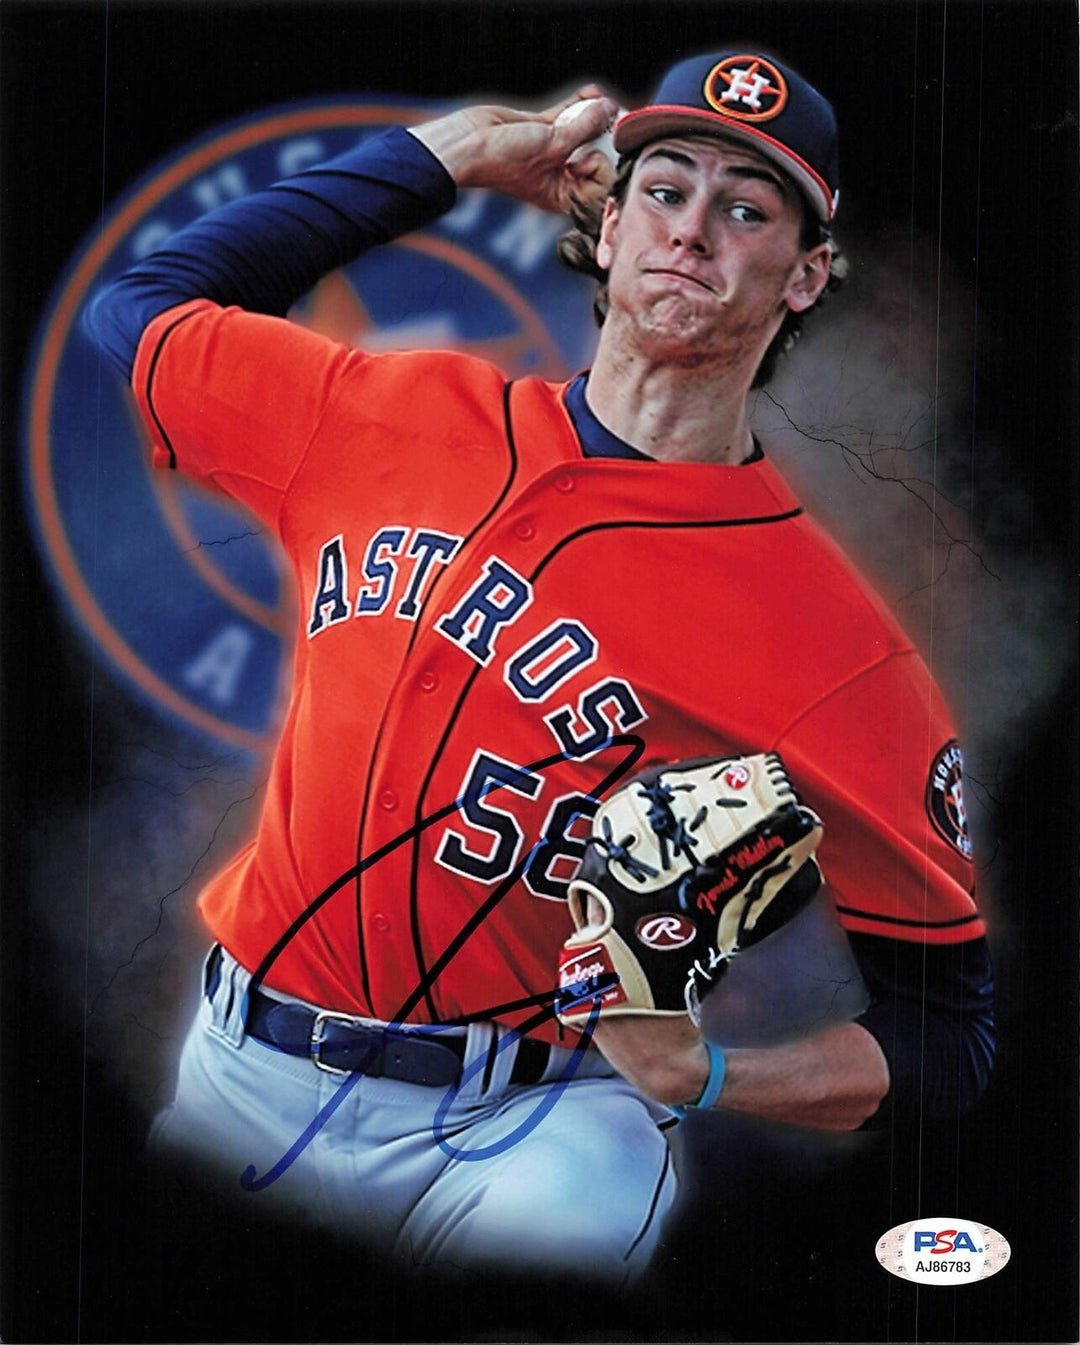 FORREST WHITLEY signed 8x10 photo PSA/DNA Houston Astros Autographed Image 1